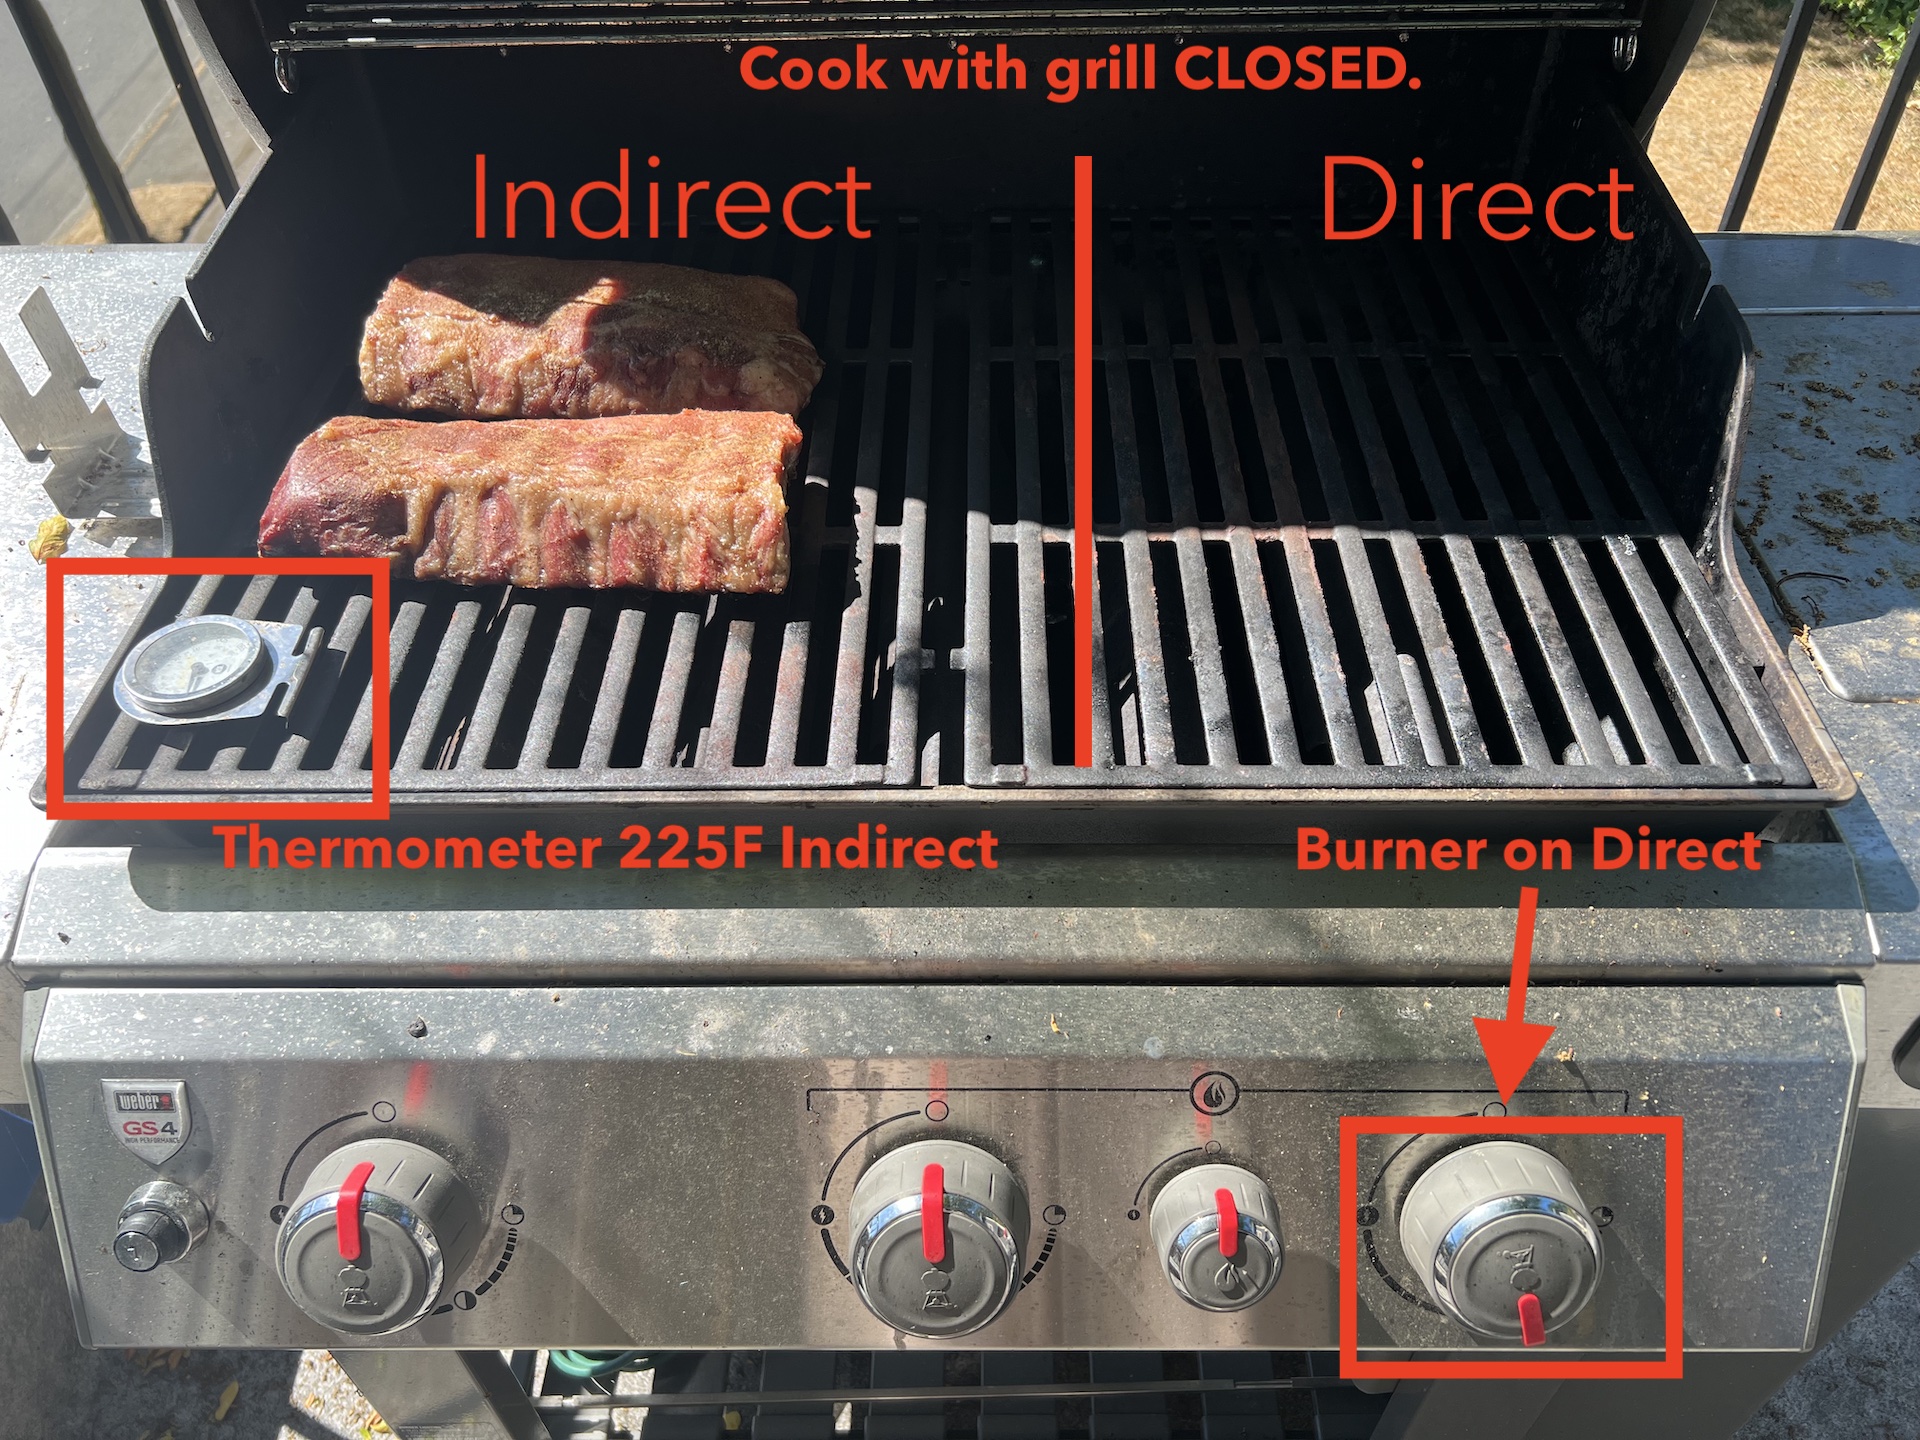 Diagram of grill with direct and indirect heat labeled